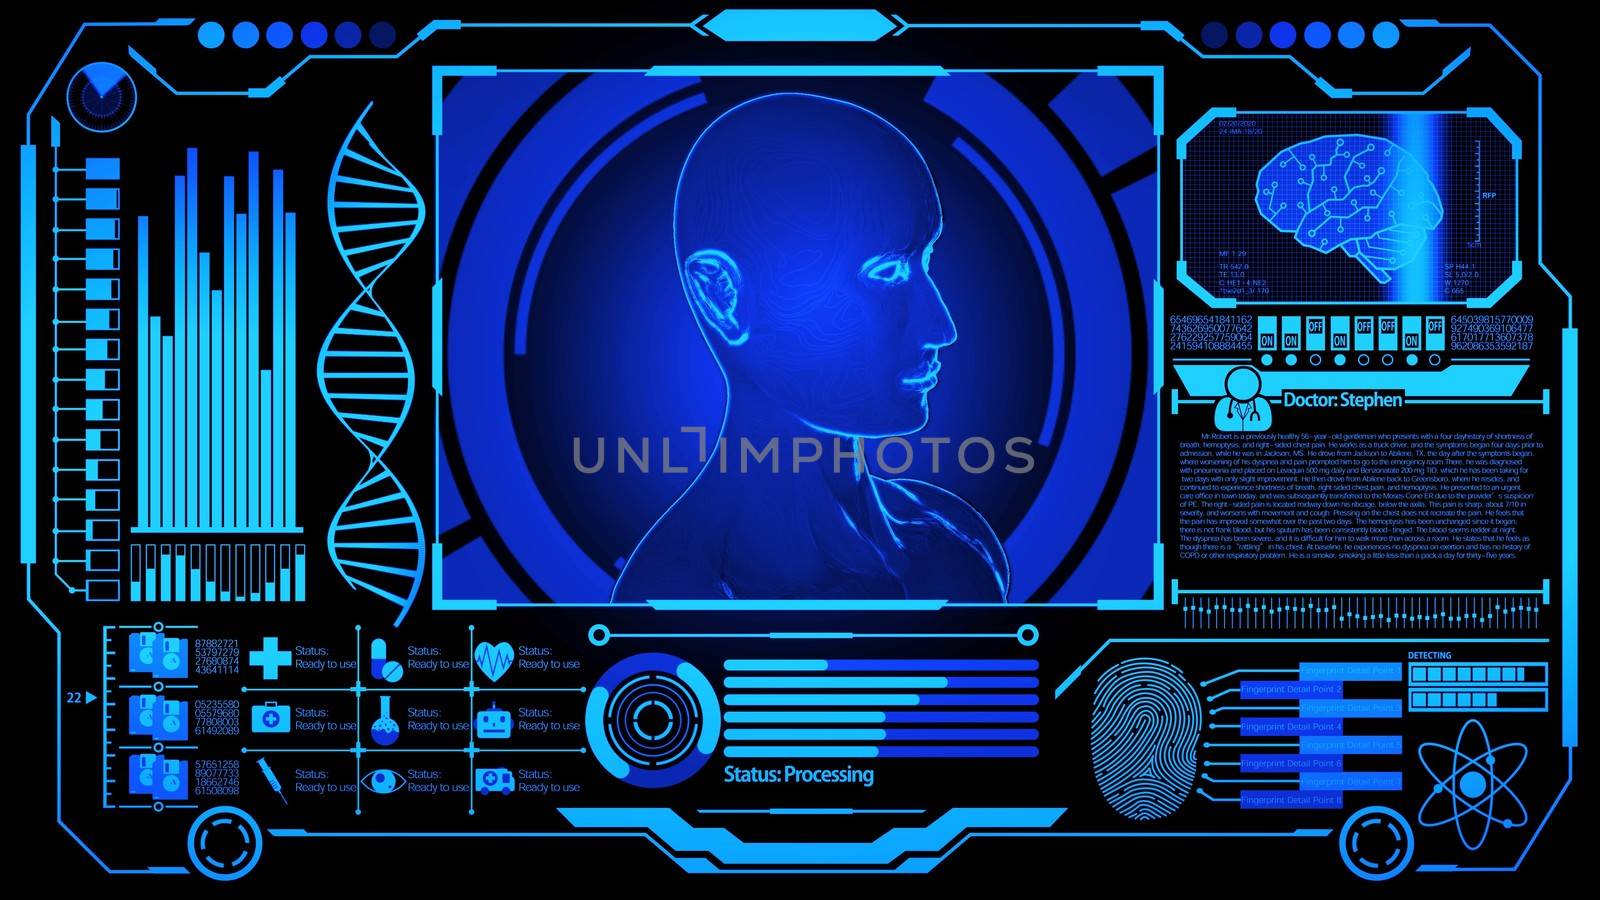 3D Human Head Model Rendering Rotating in Medical Futuristic HUD Display Screen including DNA, Digital Brain Scan, Fingerprint and more with Blue Color Still Image Ver.1 (Full screen)